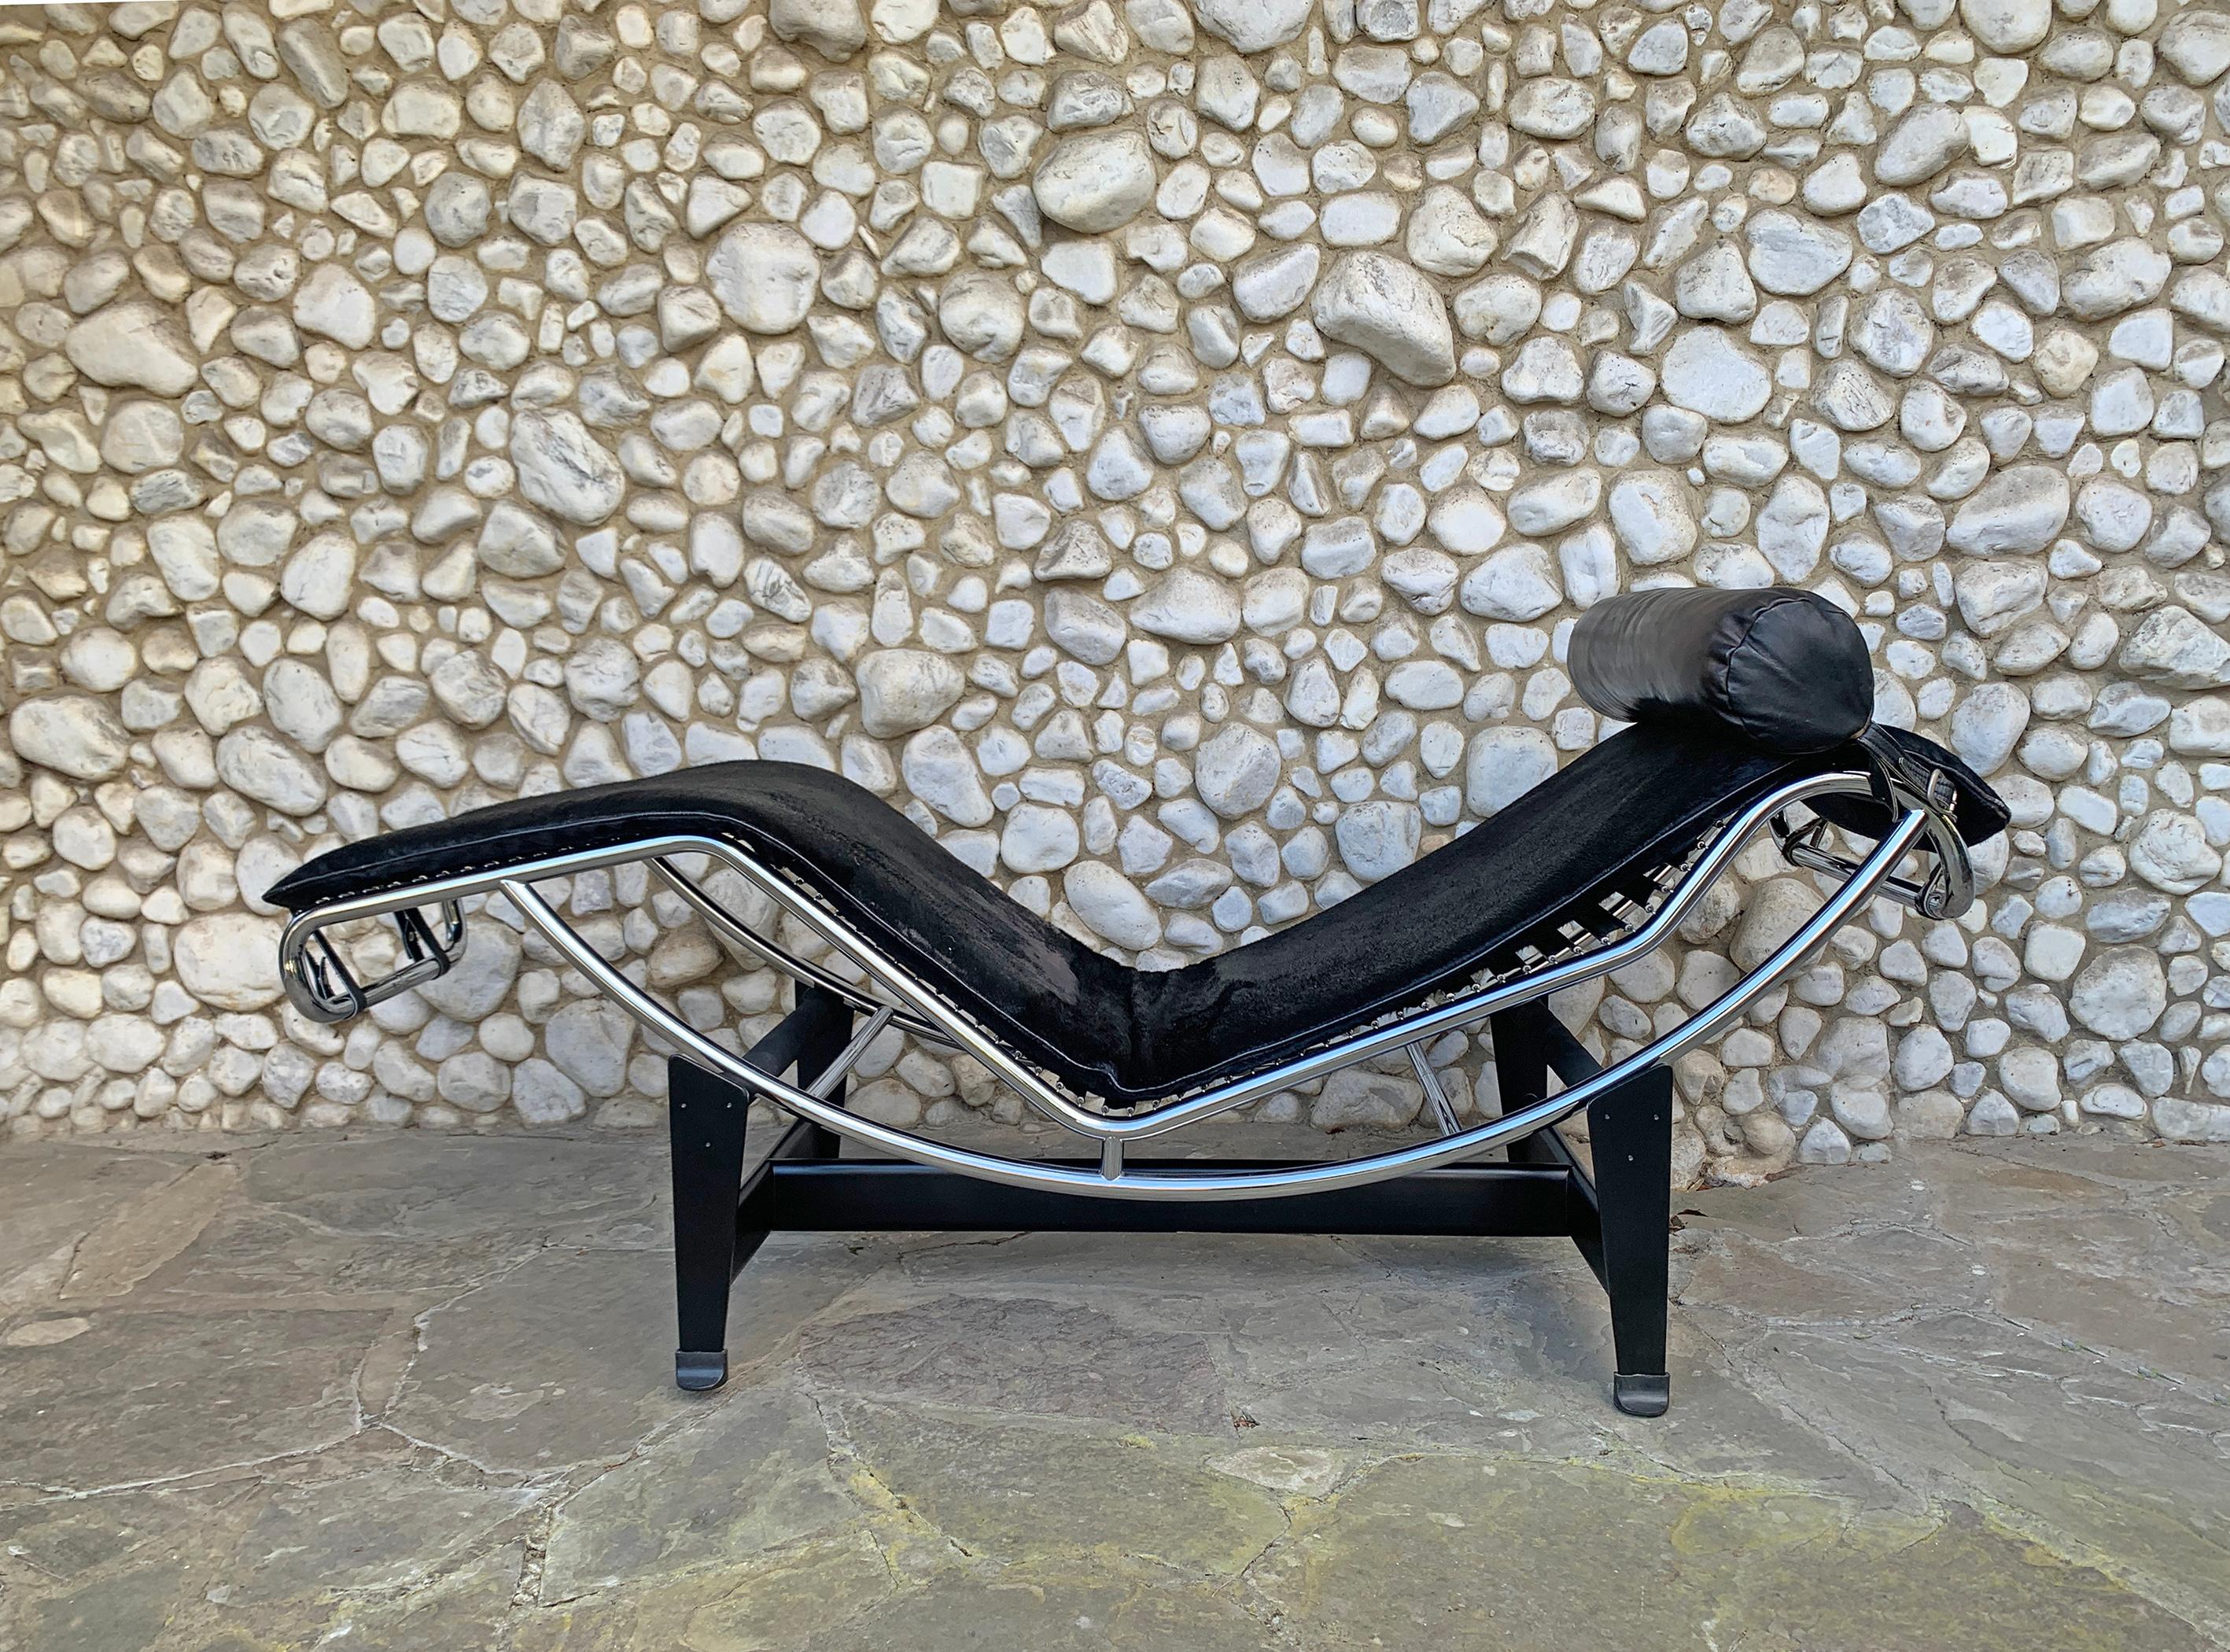 LC4 chaise longue designed by Le Corbusier, Pierre Jeanneret, and Charlotte Perriand in 1928.

Cassina bought the rights and started to produce these chairs +/-1960. This particular chair is numbered 1153 and has probably been manufactured in the